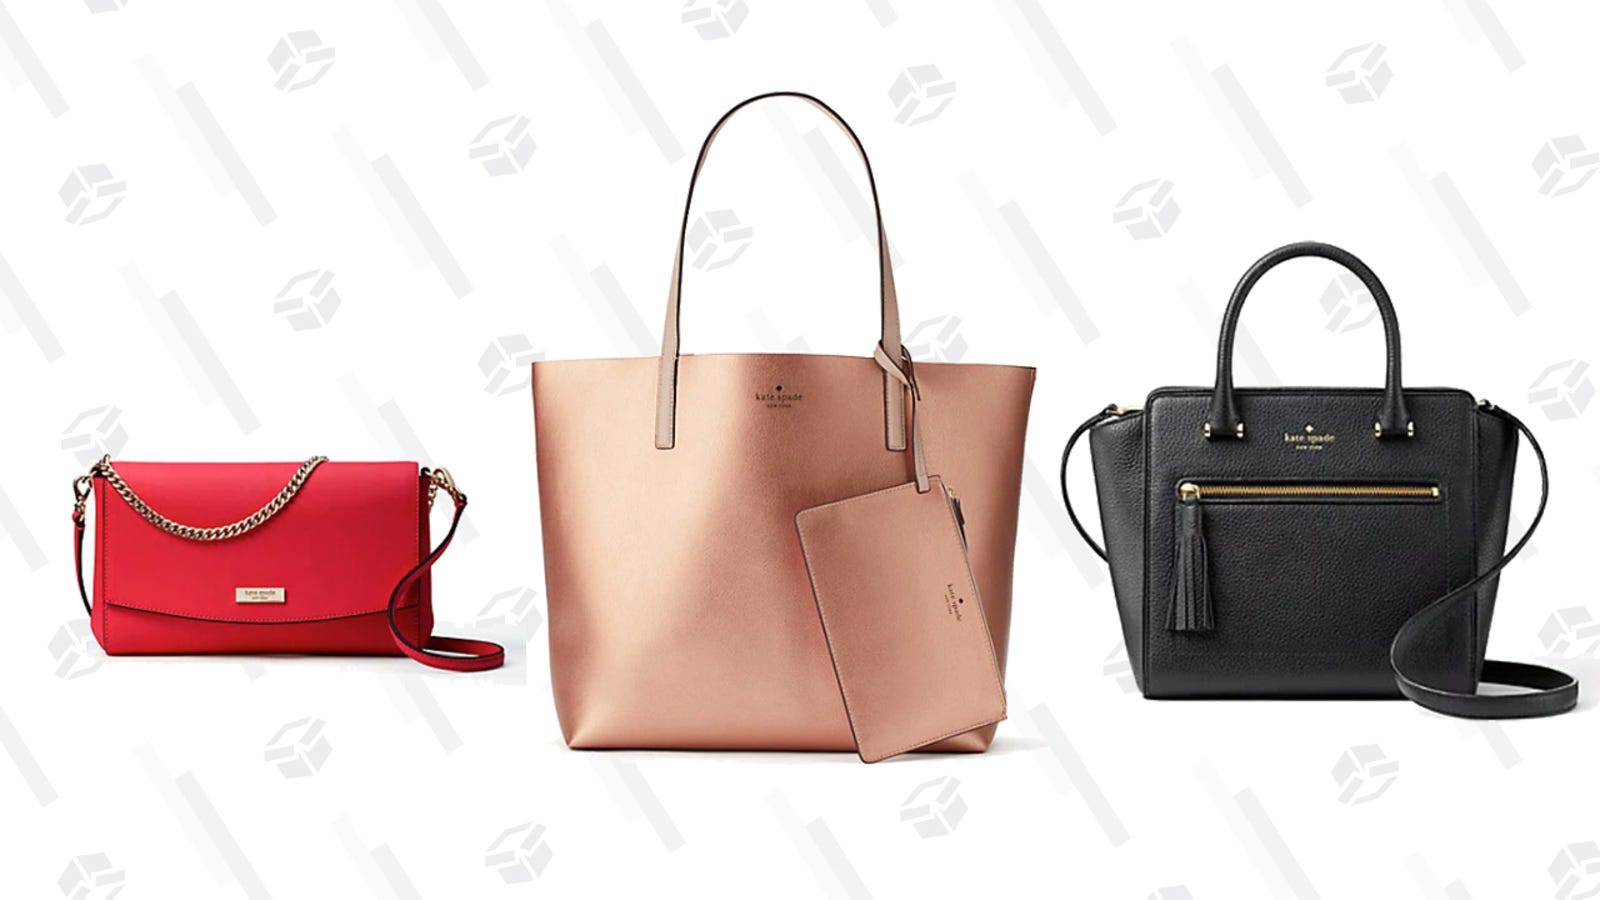 Bag a New Handbag For 75% Off From Kate Spade's Surprise Sale